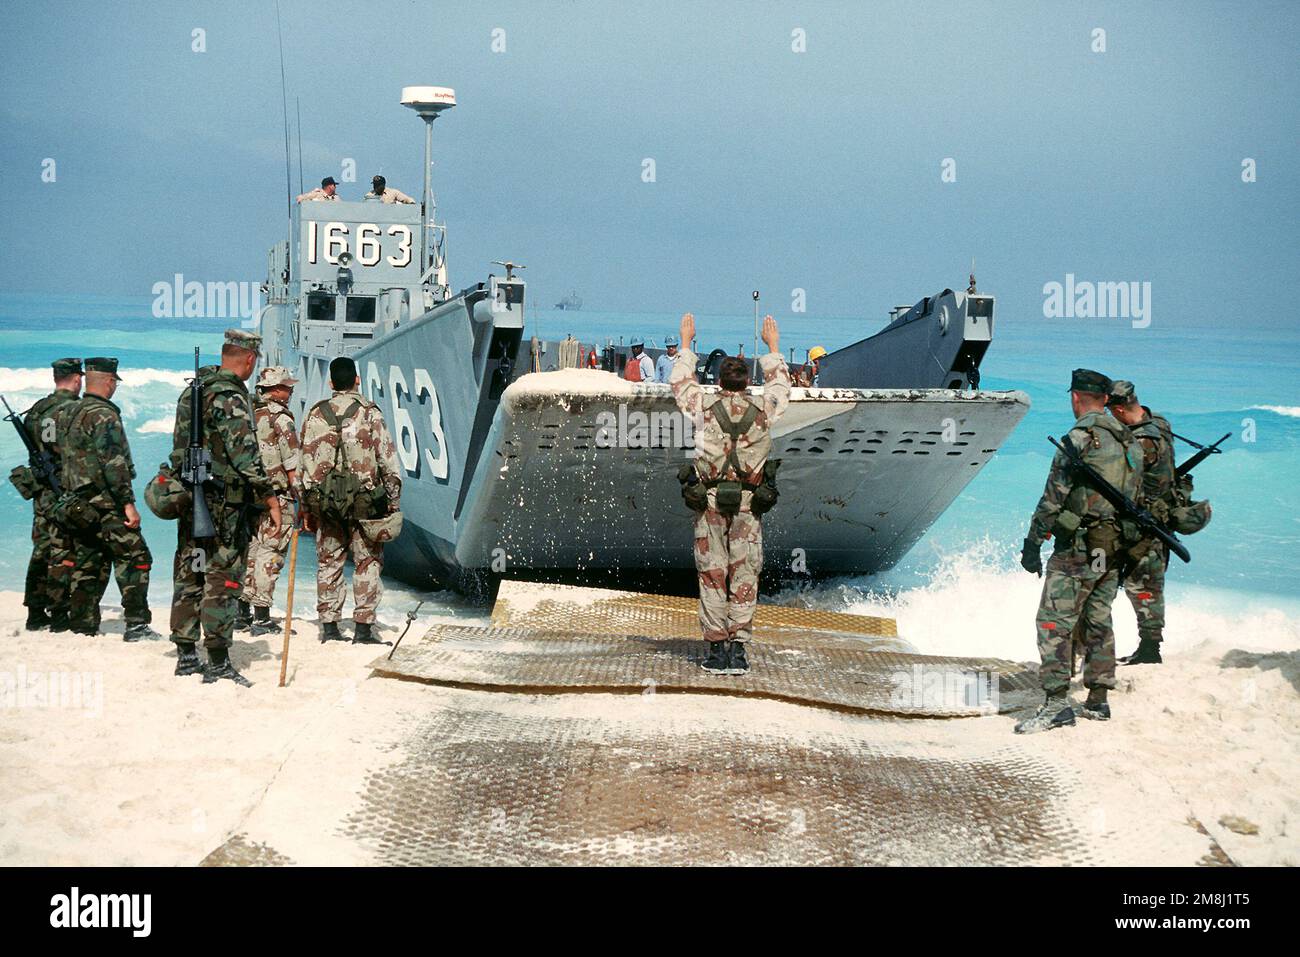 A US Army soldier signals as a utility landing craft (LCU 1663) prepares to depart a beach in Egypt after dropping off a group of US Navy Seabees from Amphibious Construction Battalion 2, armed with M16 rifles, during Exercise BRIGHT STAR '94. Subject Operation/Series: BRIGHT STAR '94 Country: Egypt (EGY) Stock Photo